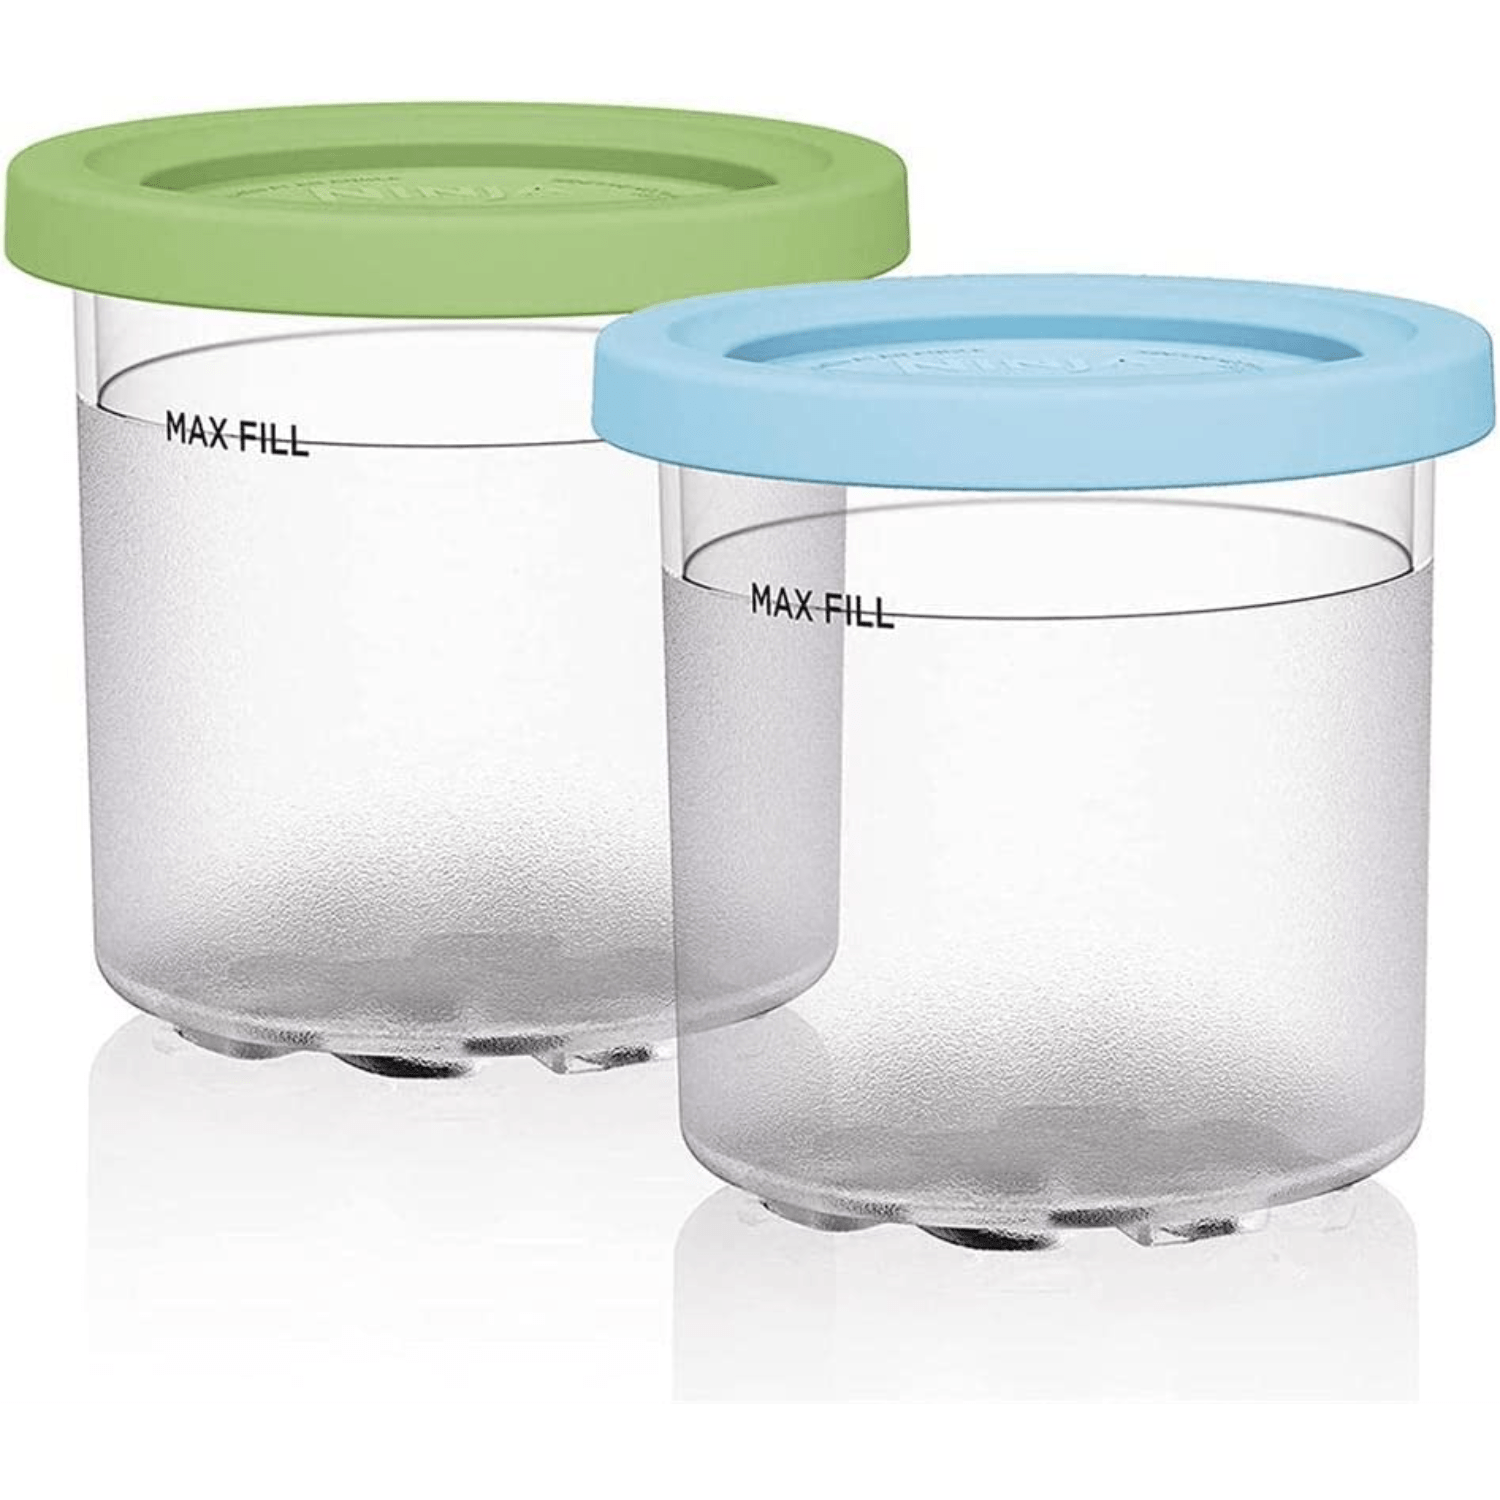 4pcs Ice Cream Pints Cup Ice Cream Containers With Lids For Ninja